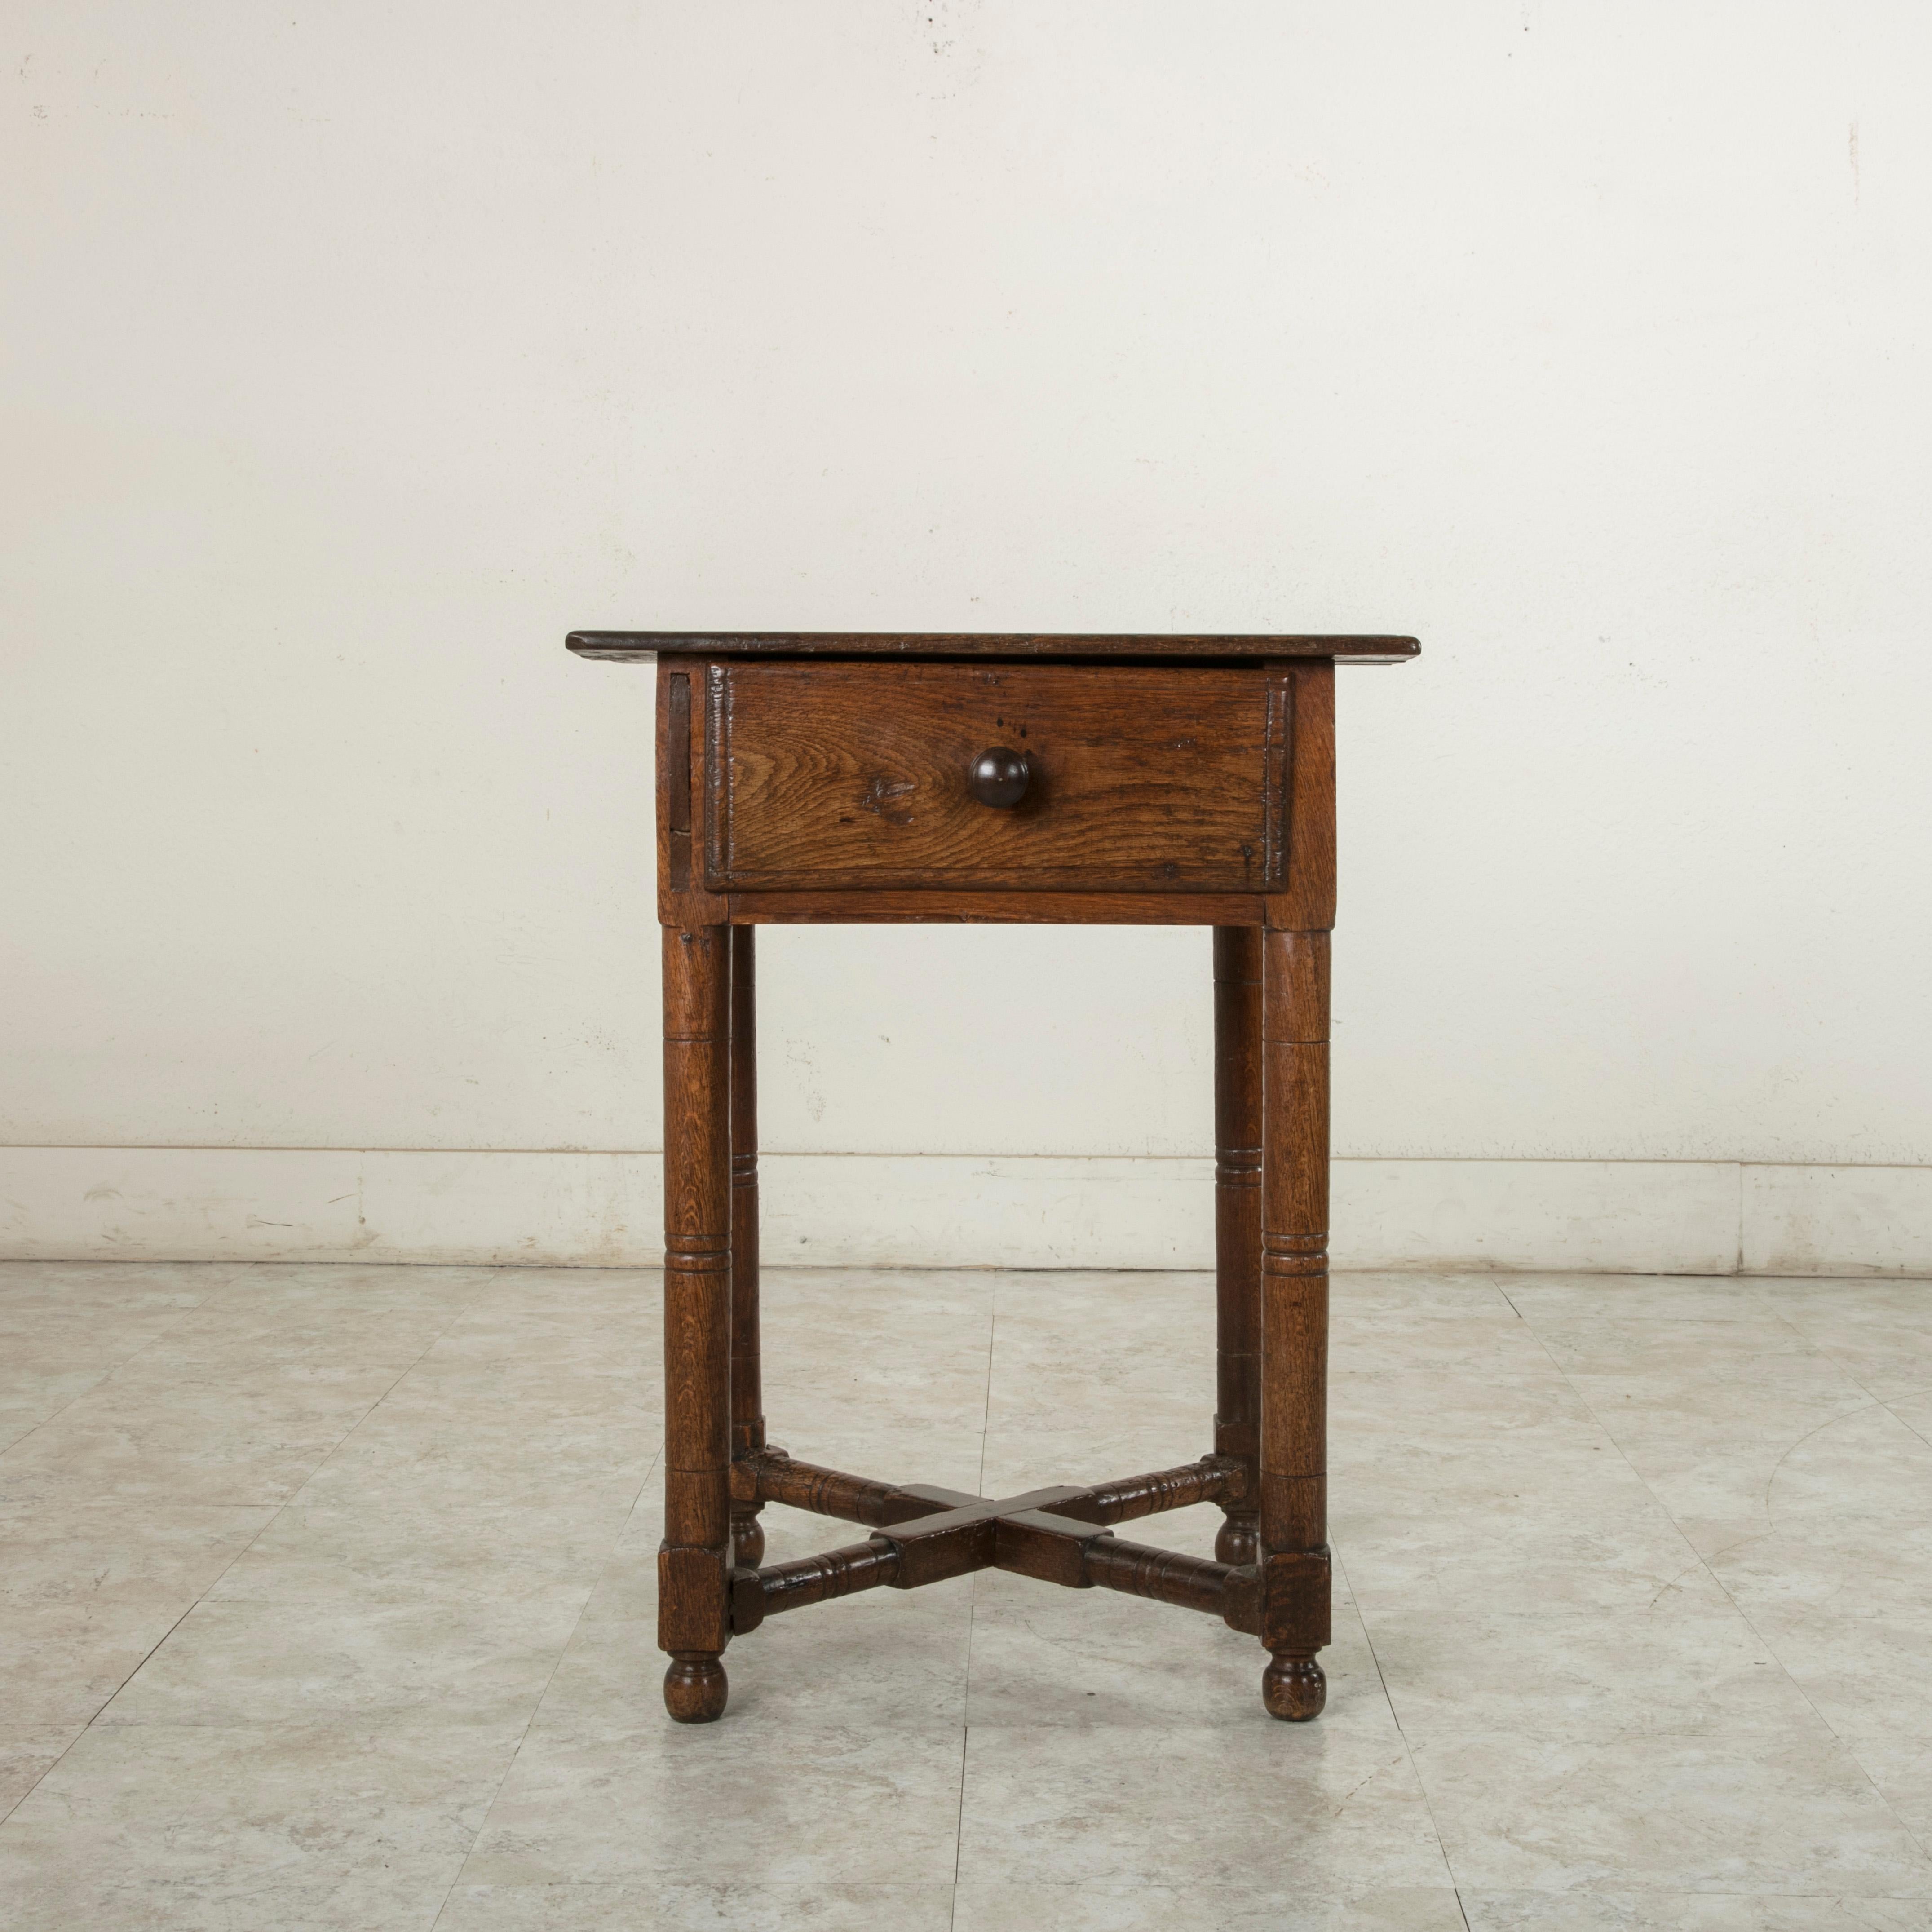 This late 19th century French artisan made oak side table features hand pegged mortise and Tenon joinery and a beveled top.
Its single drawer is fitted with a knob drawer pull, and its turned legs are joined by an X-stretcher to provide stability,